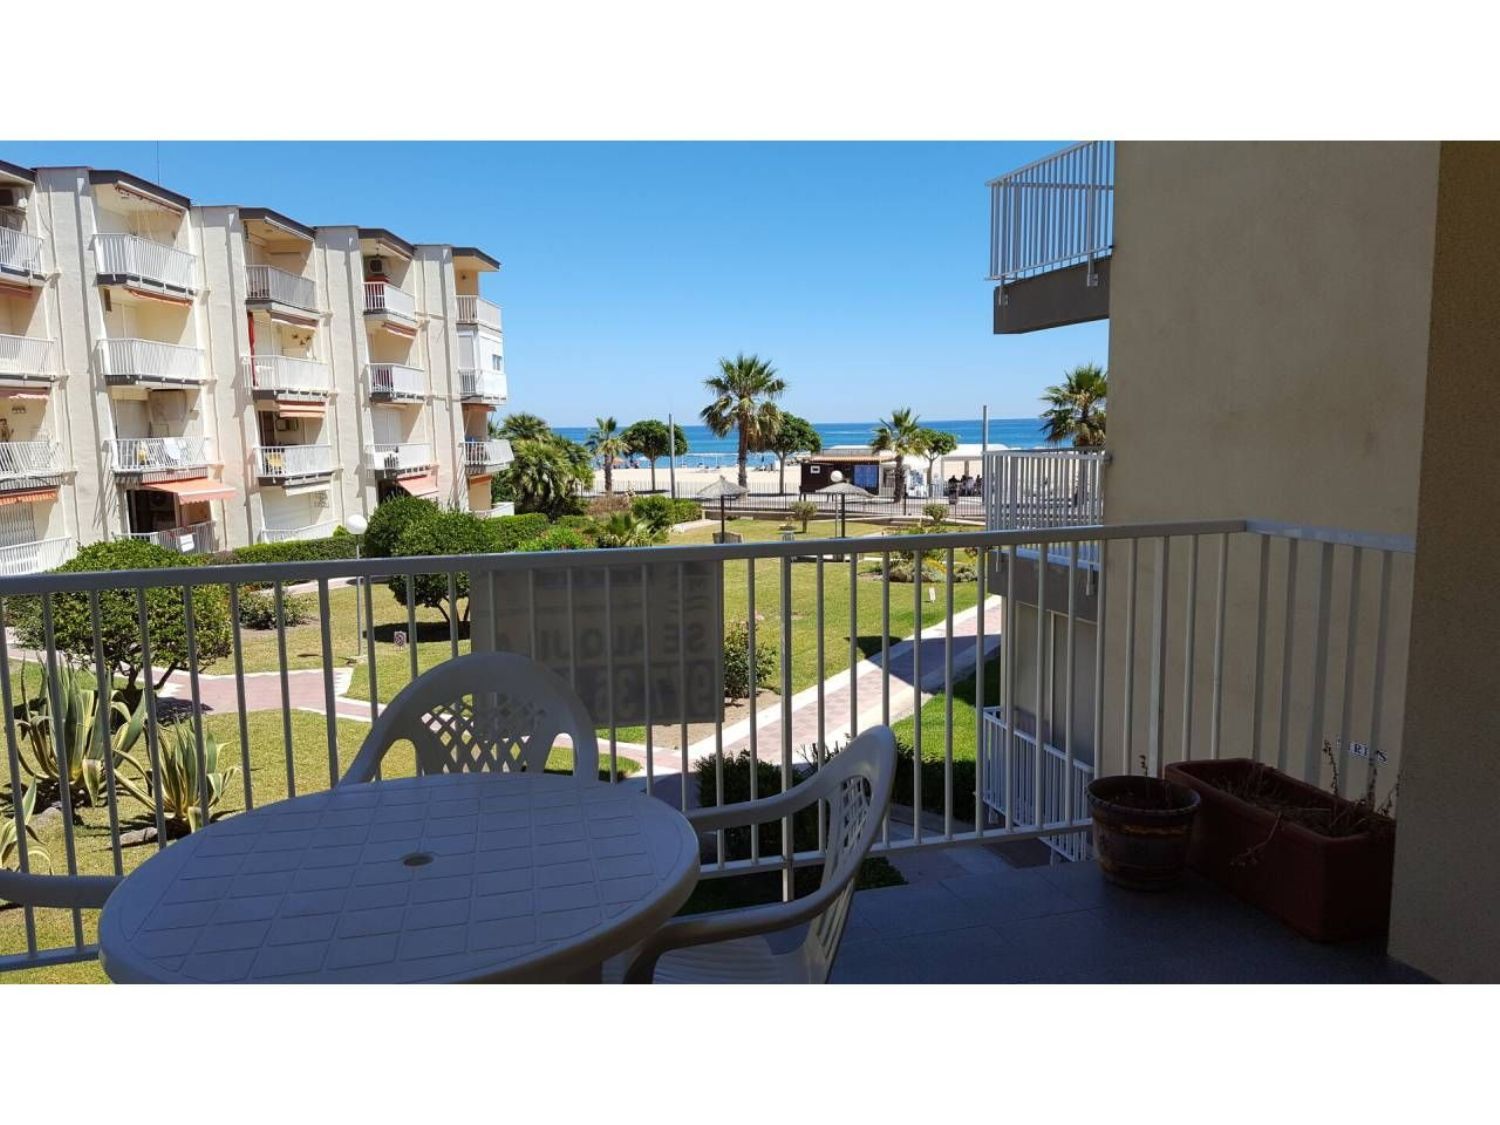 Apartment for sale on the seafront on Carrer General Belgrano, in Cambrils